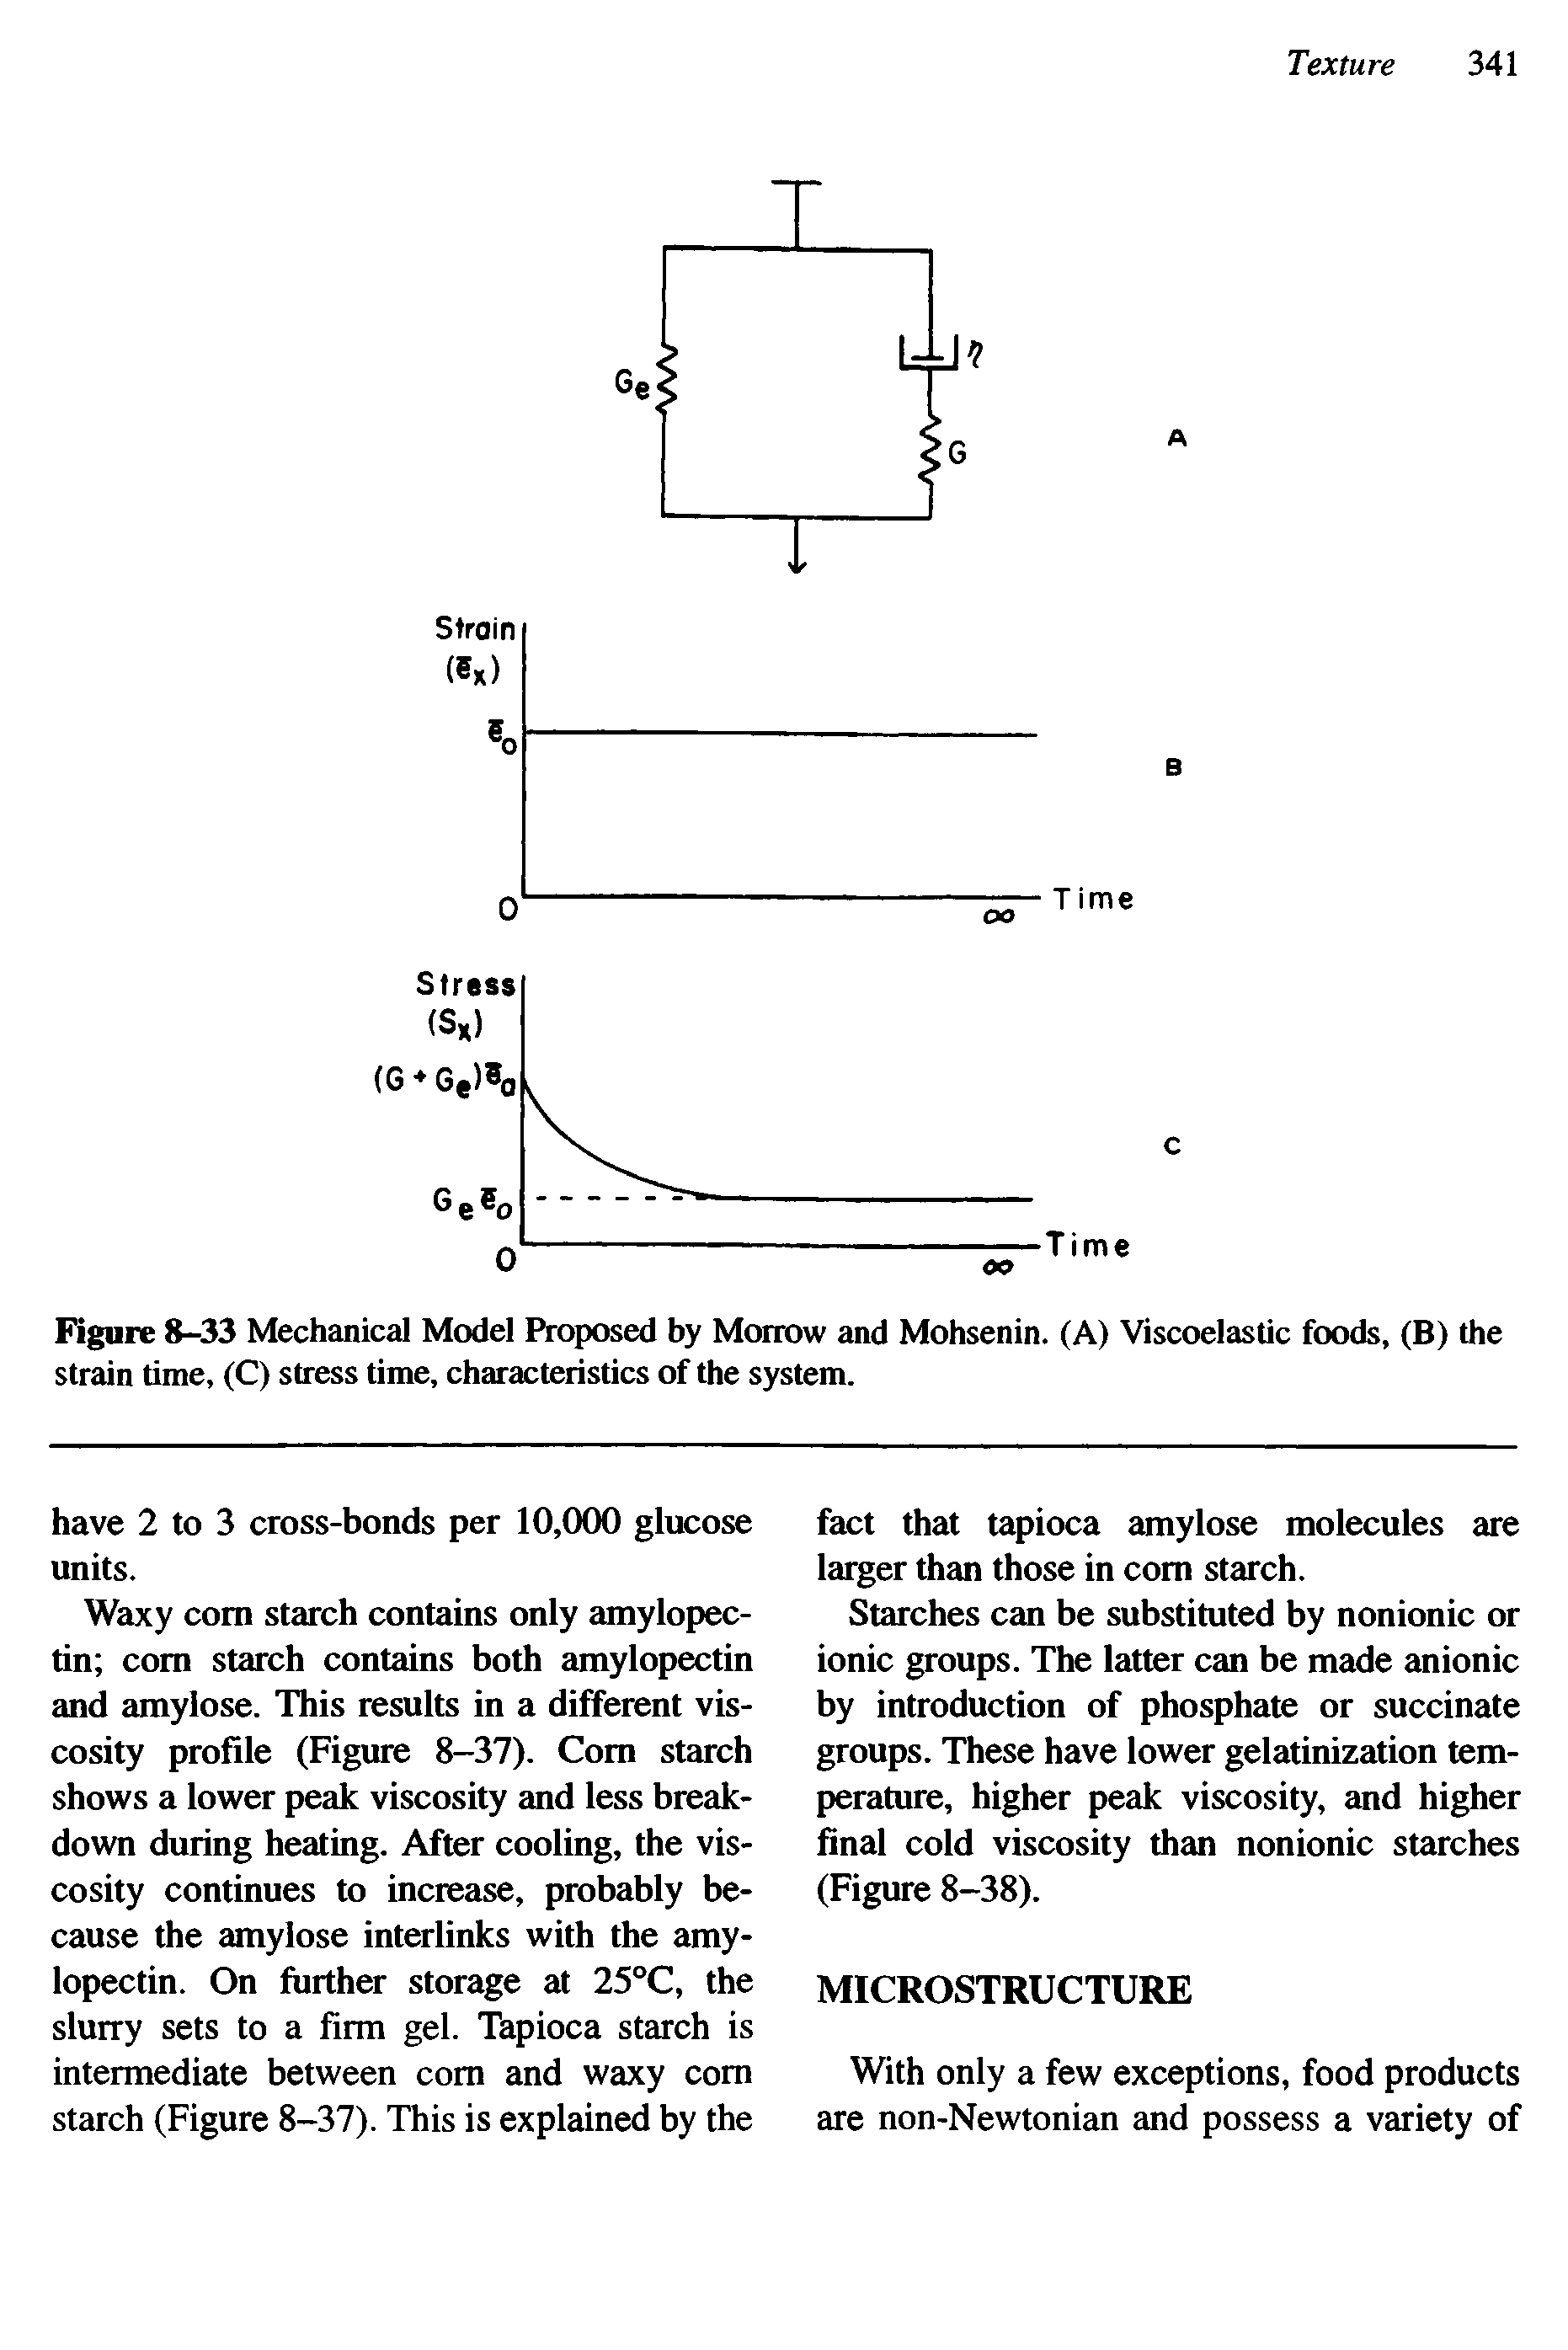 Figure 8-33 Mechanical Model Proposed by Morrow and Mohsenin. (A) Viscoelastic foods, (B) the strain time, (C) stress time, characteristics of the system.